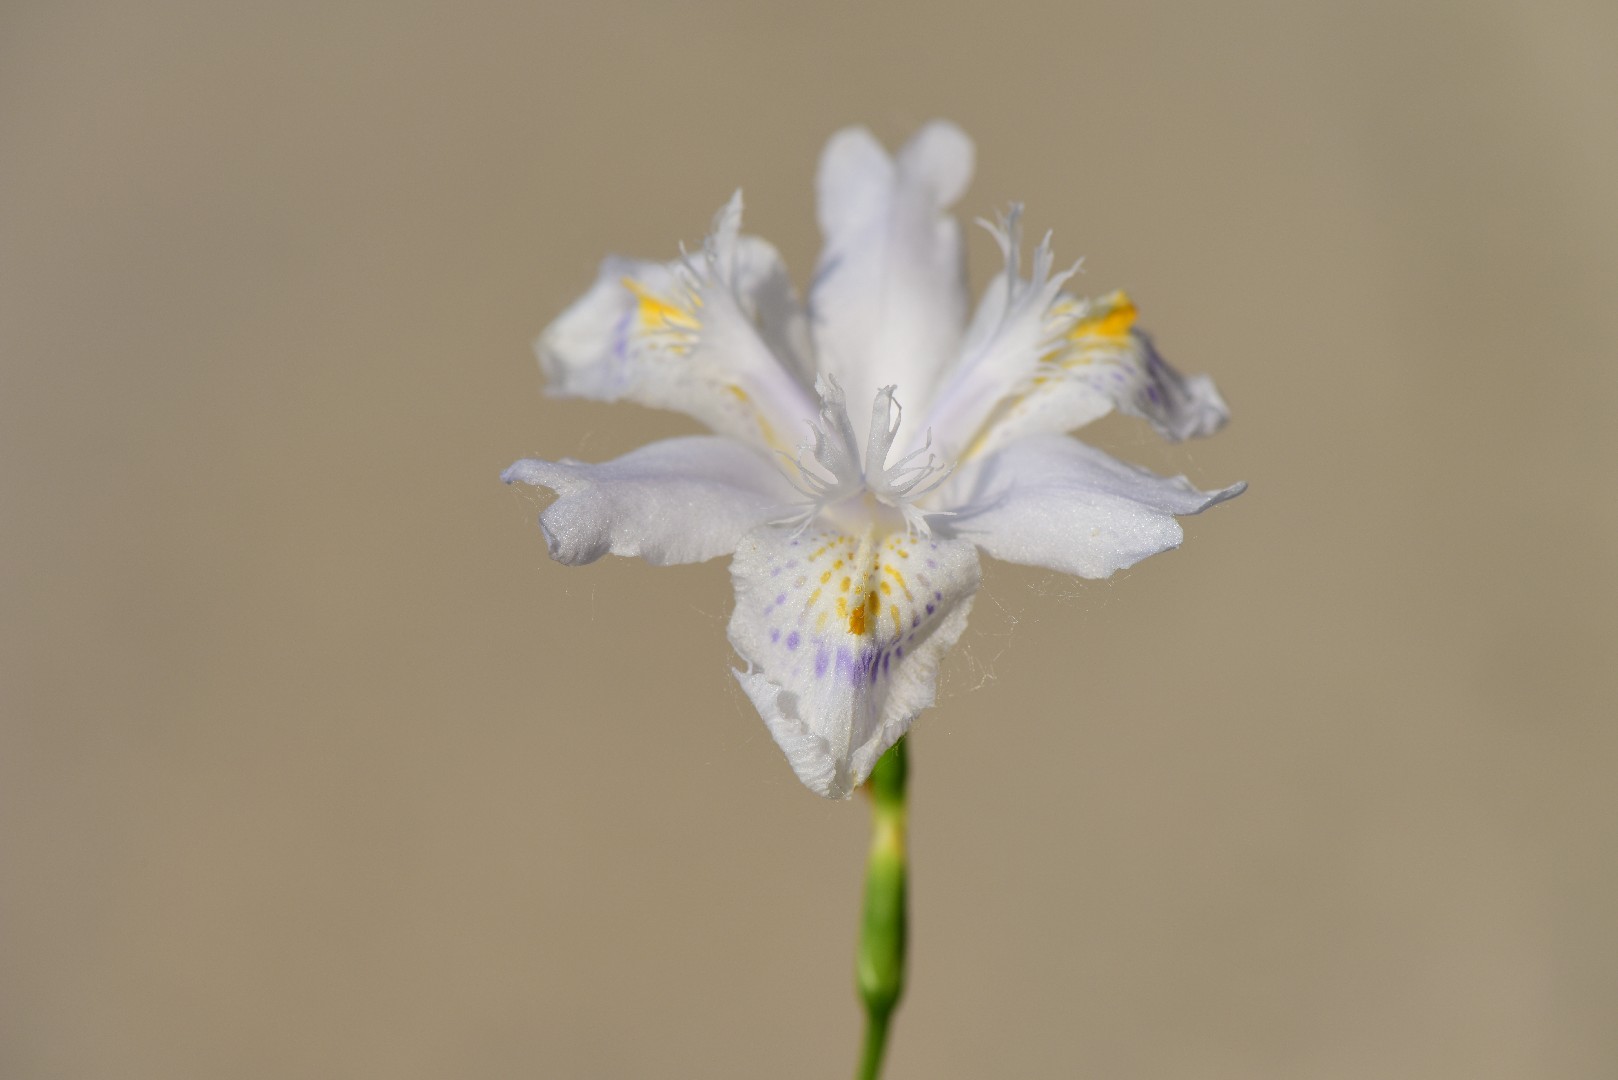 Butterfly-flower (Iris japonica) Flower, Leaf, Care, Uses - PictureThis